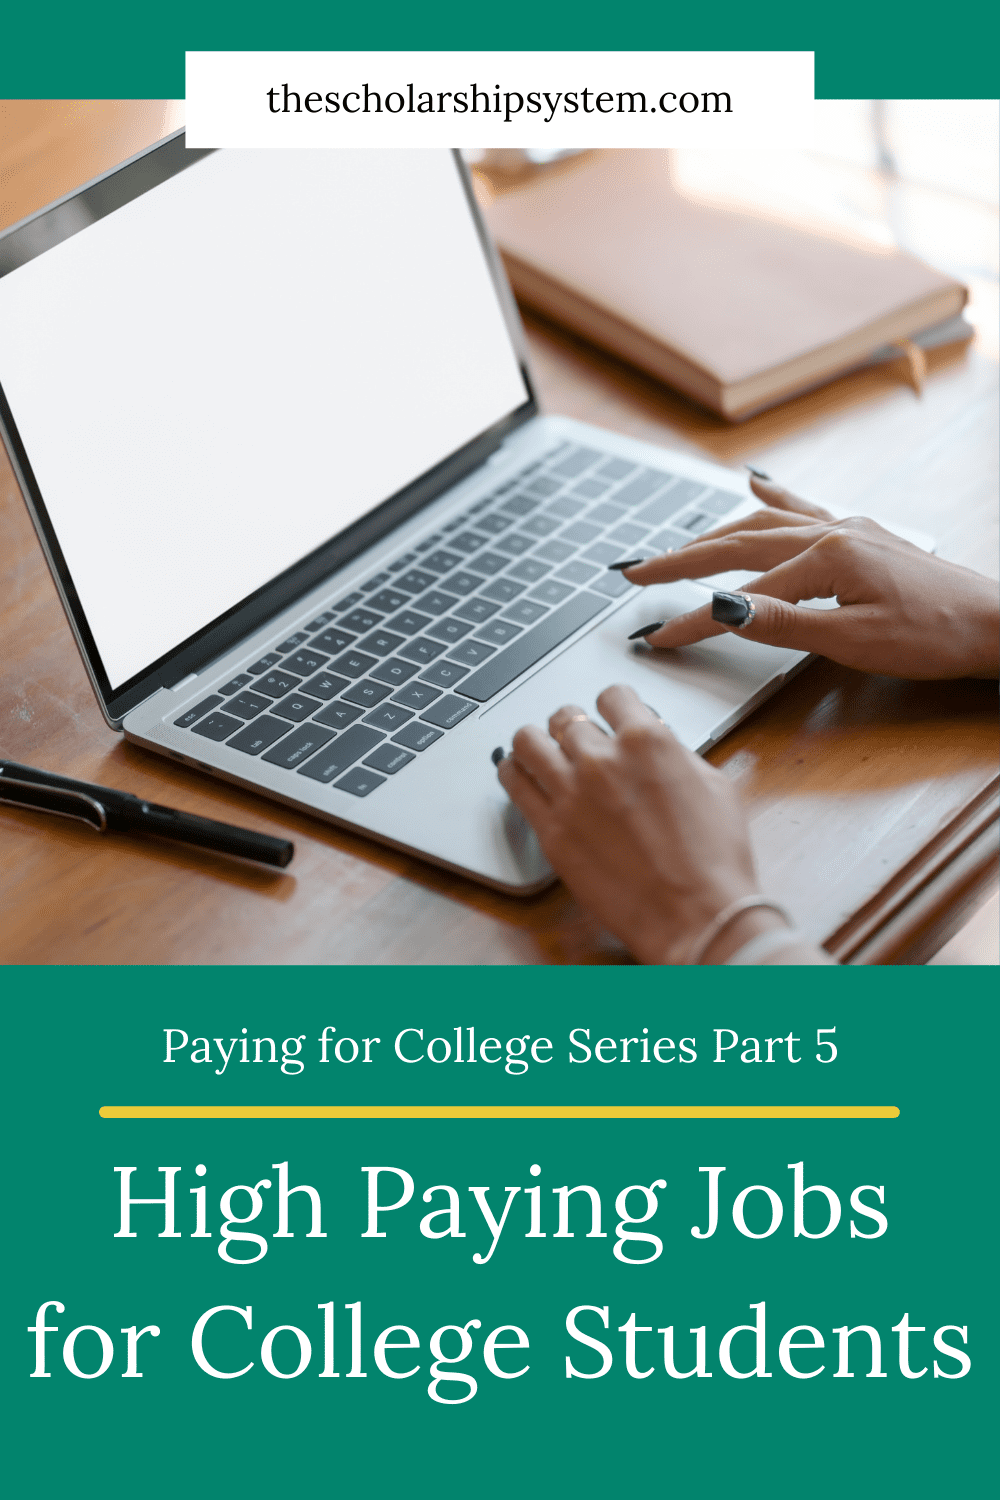 Thanks to the internet and other new business models, there are many high paying jobs for college students that are flexible as well. Here are just a few ideas.